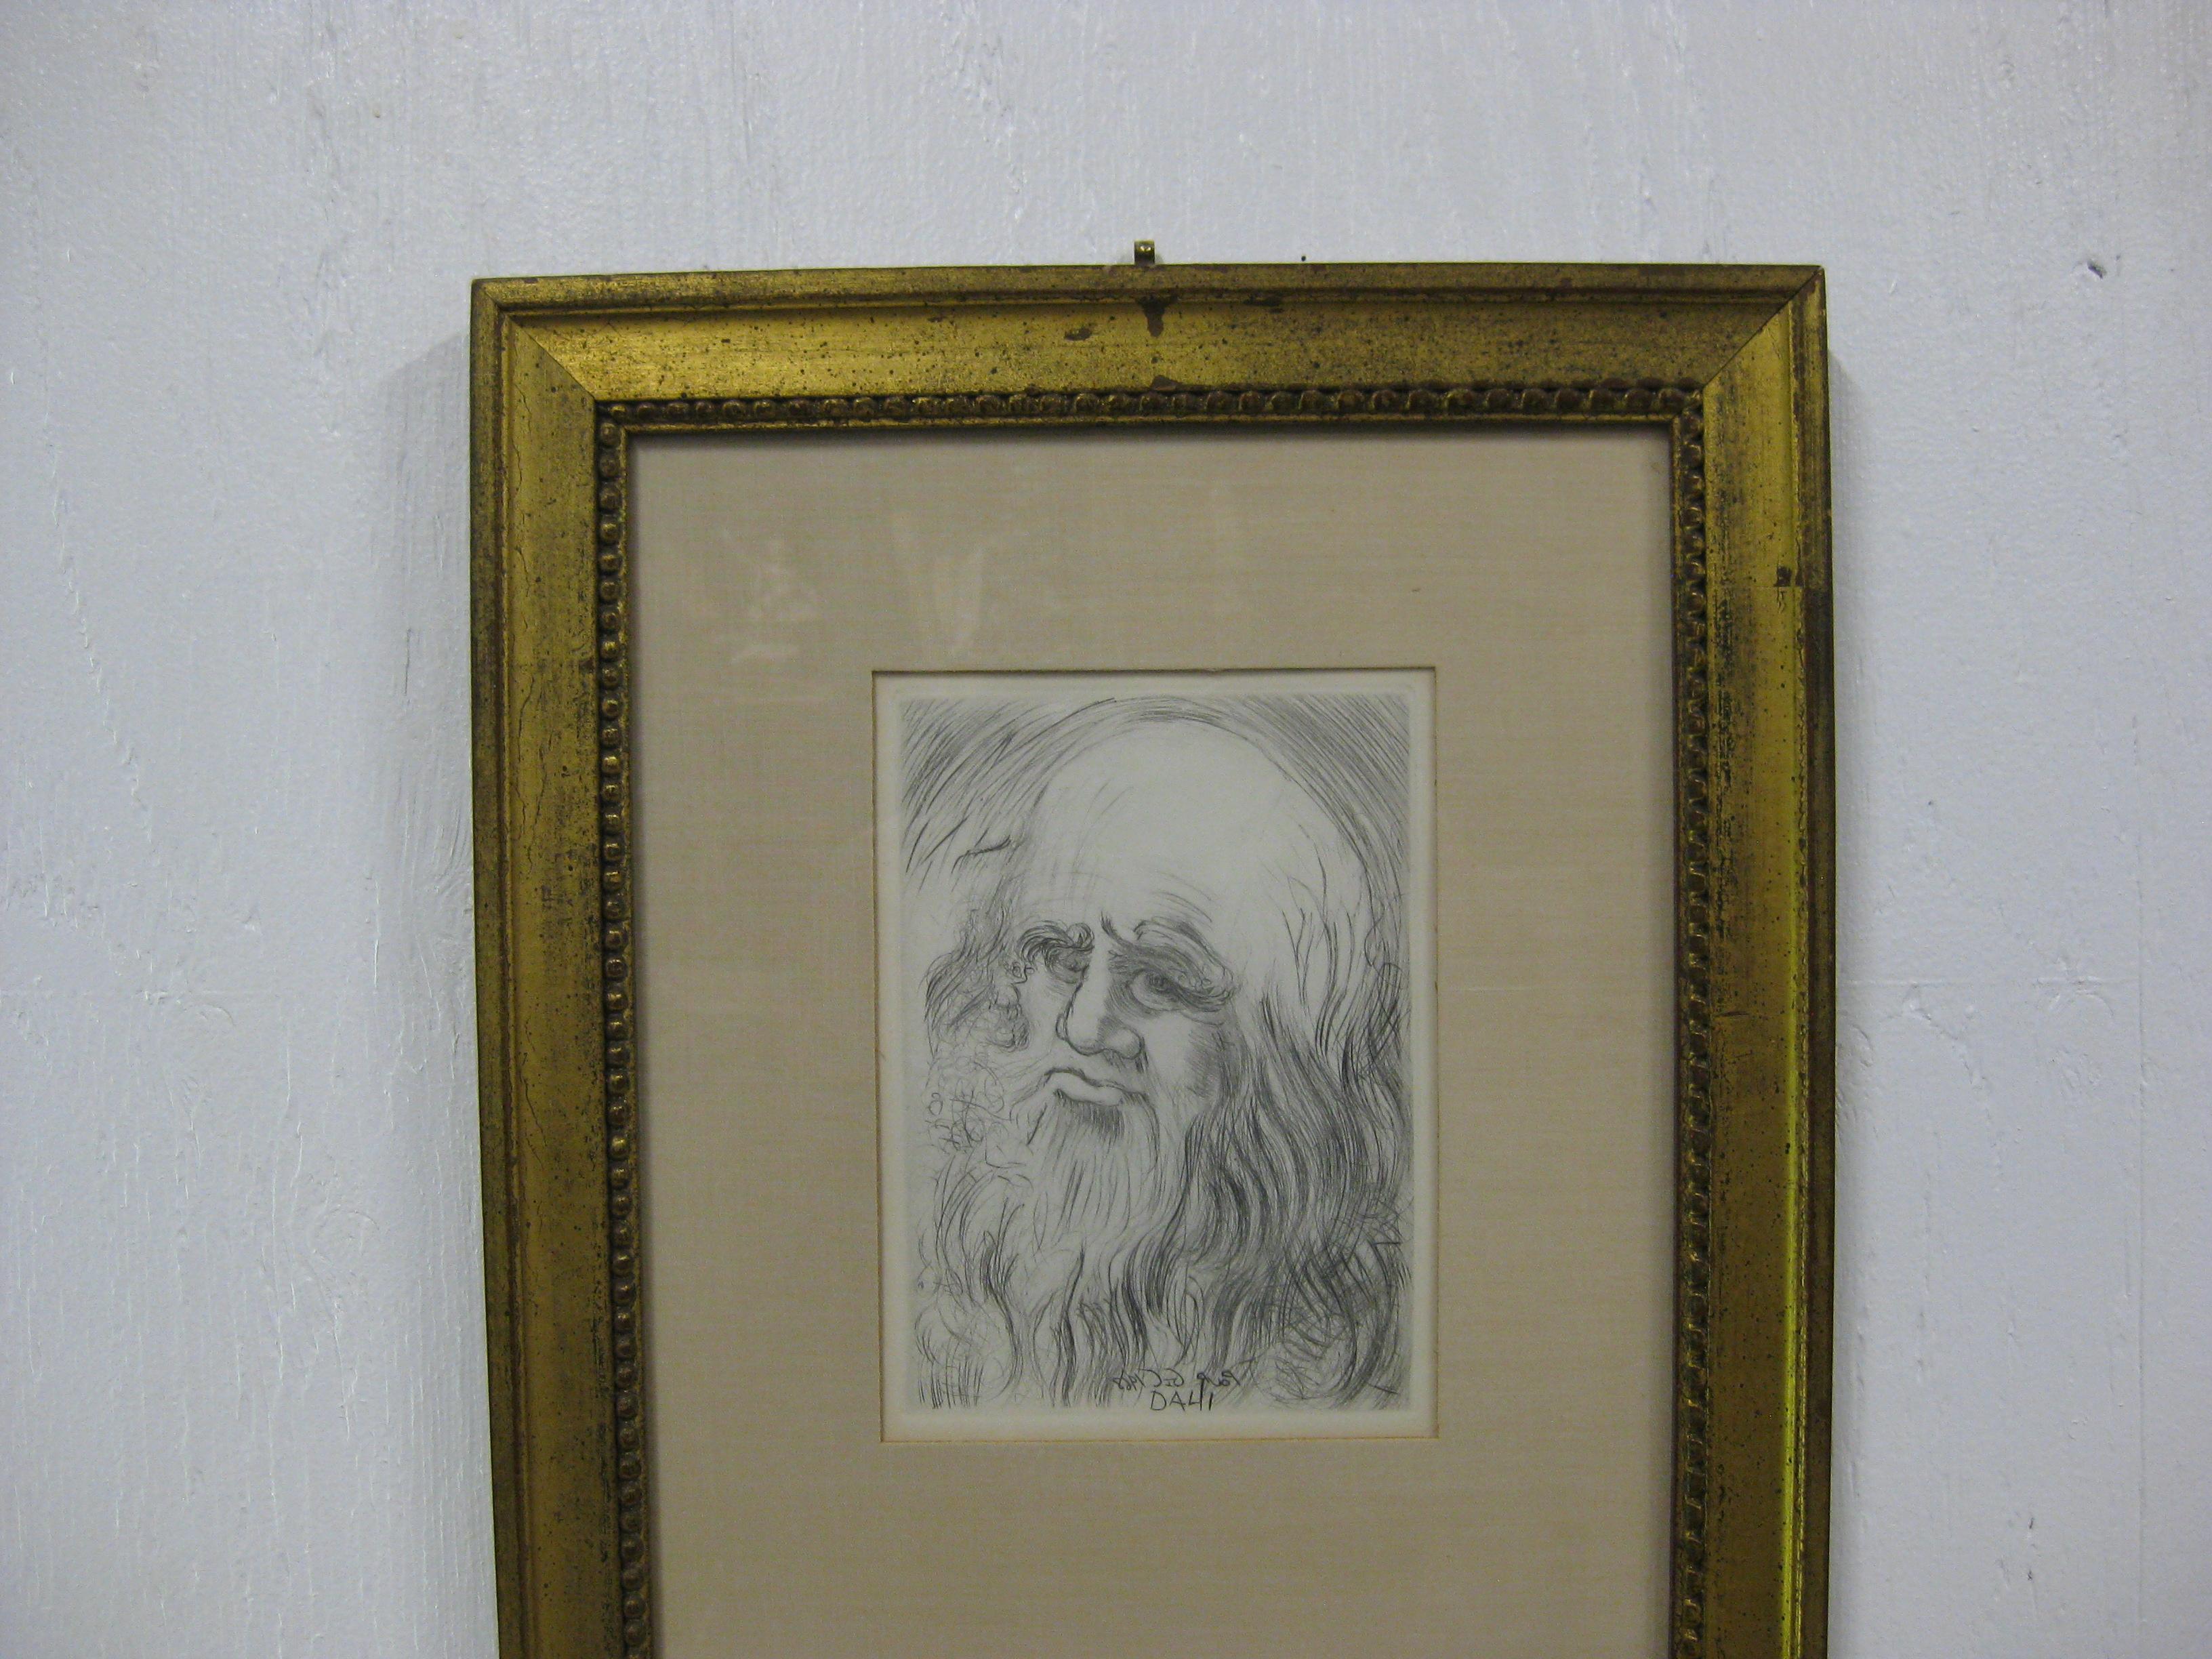 Leonardo da Vinci portrait from the ‘Immortals of art’ series of etchings produced by Dali in 1968 and published by the collector’s Guild in New York City. The series consisted of 15 etchings of artist portraits and iconic images from Dali's body of